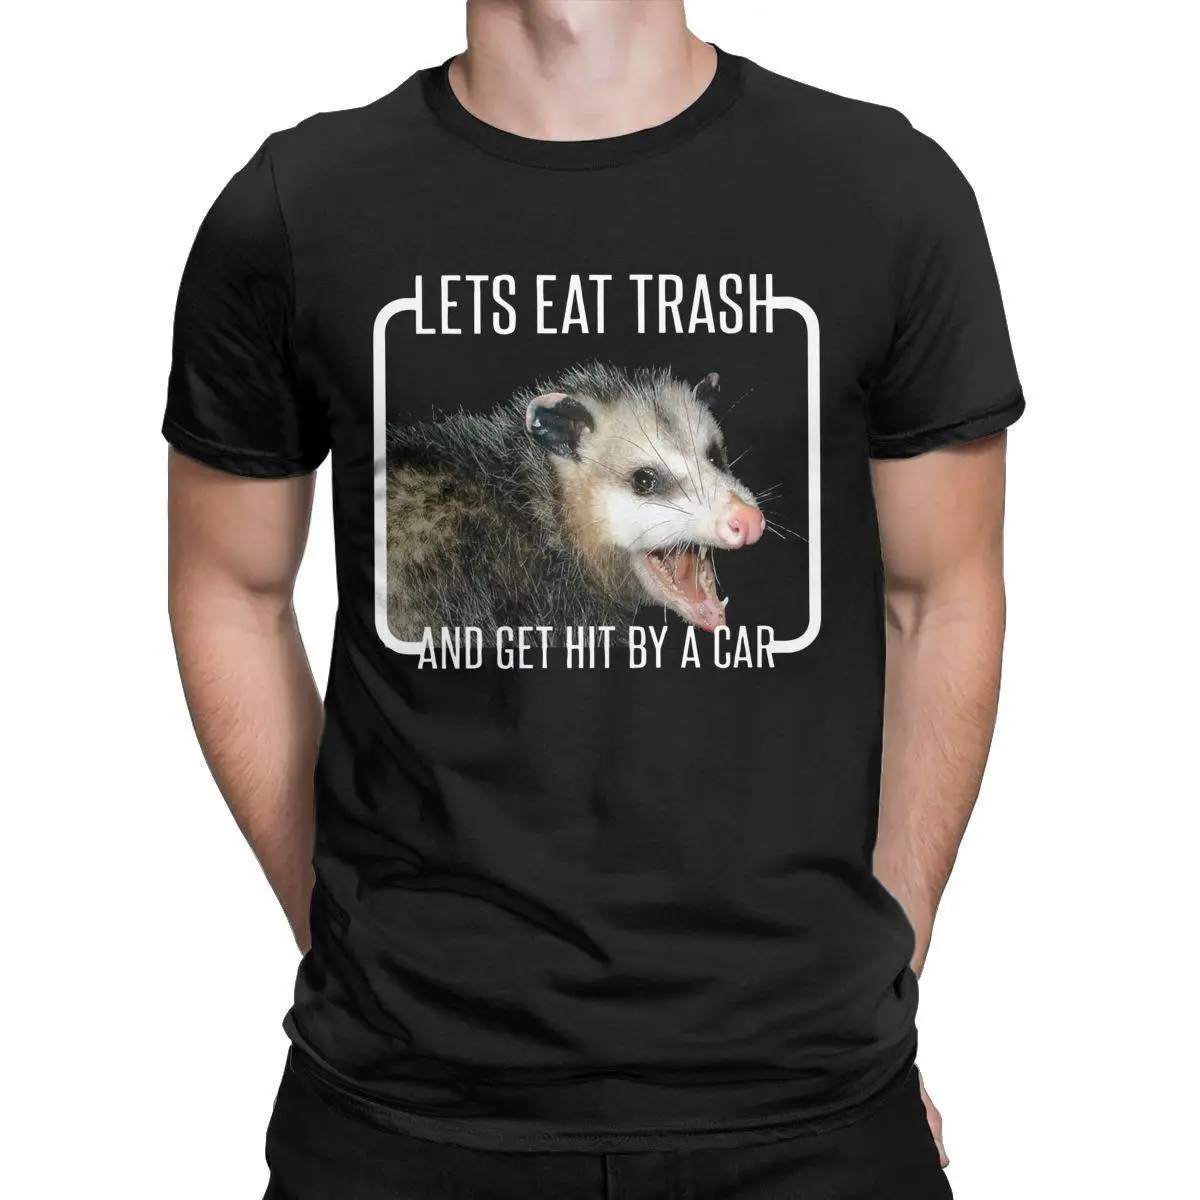 Lets Eat Trash And Get Hit By A Car T Shirts for Men 100% Cotton Casual T-Shirt Crewneck Cute Tee Shirt Short Sleeve Clothing